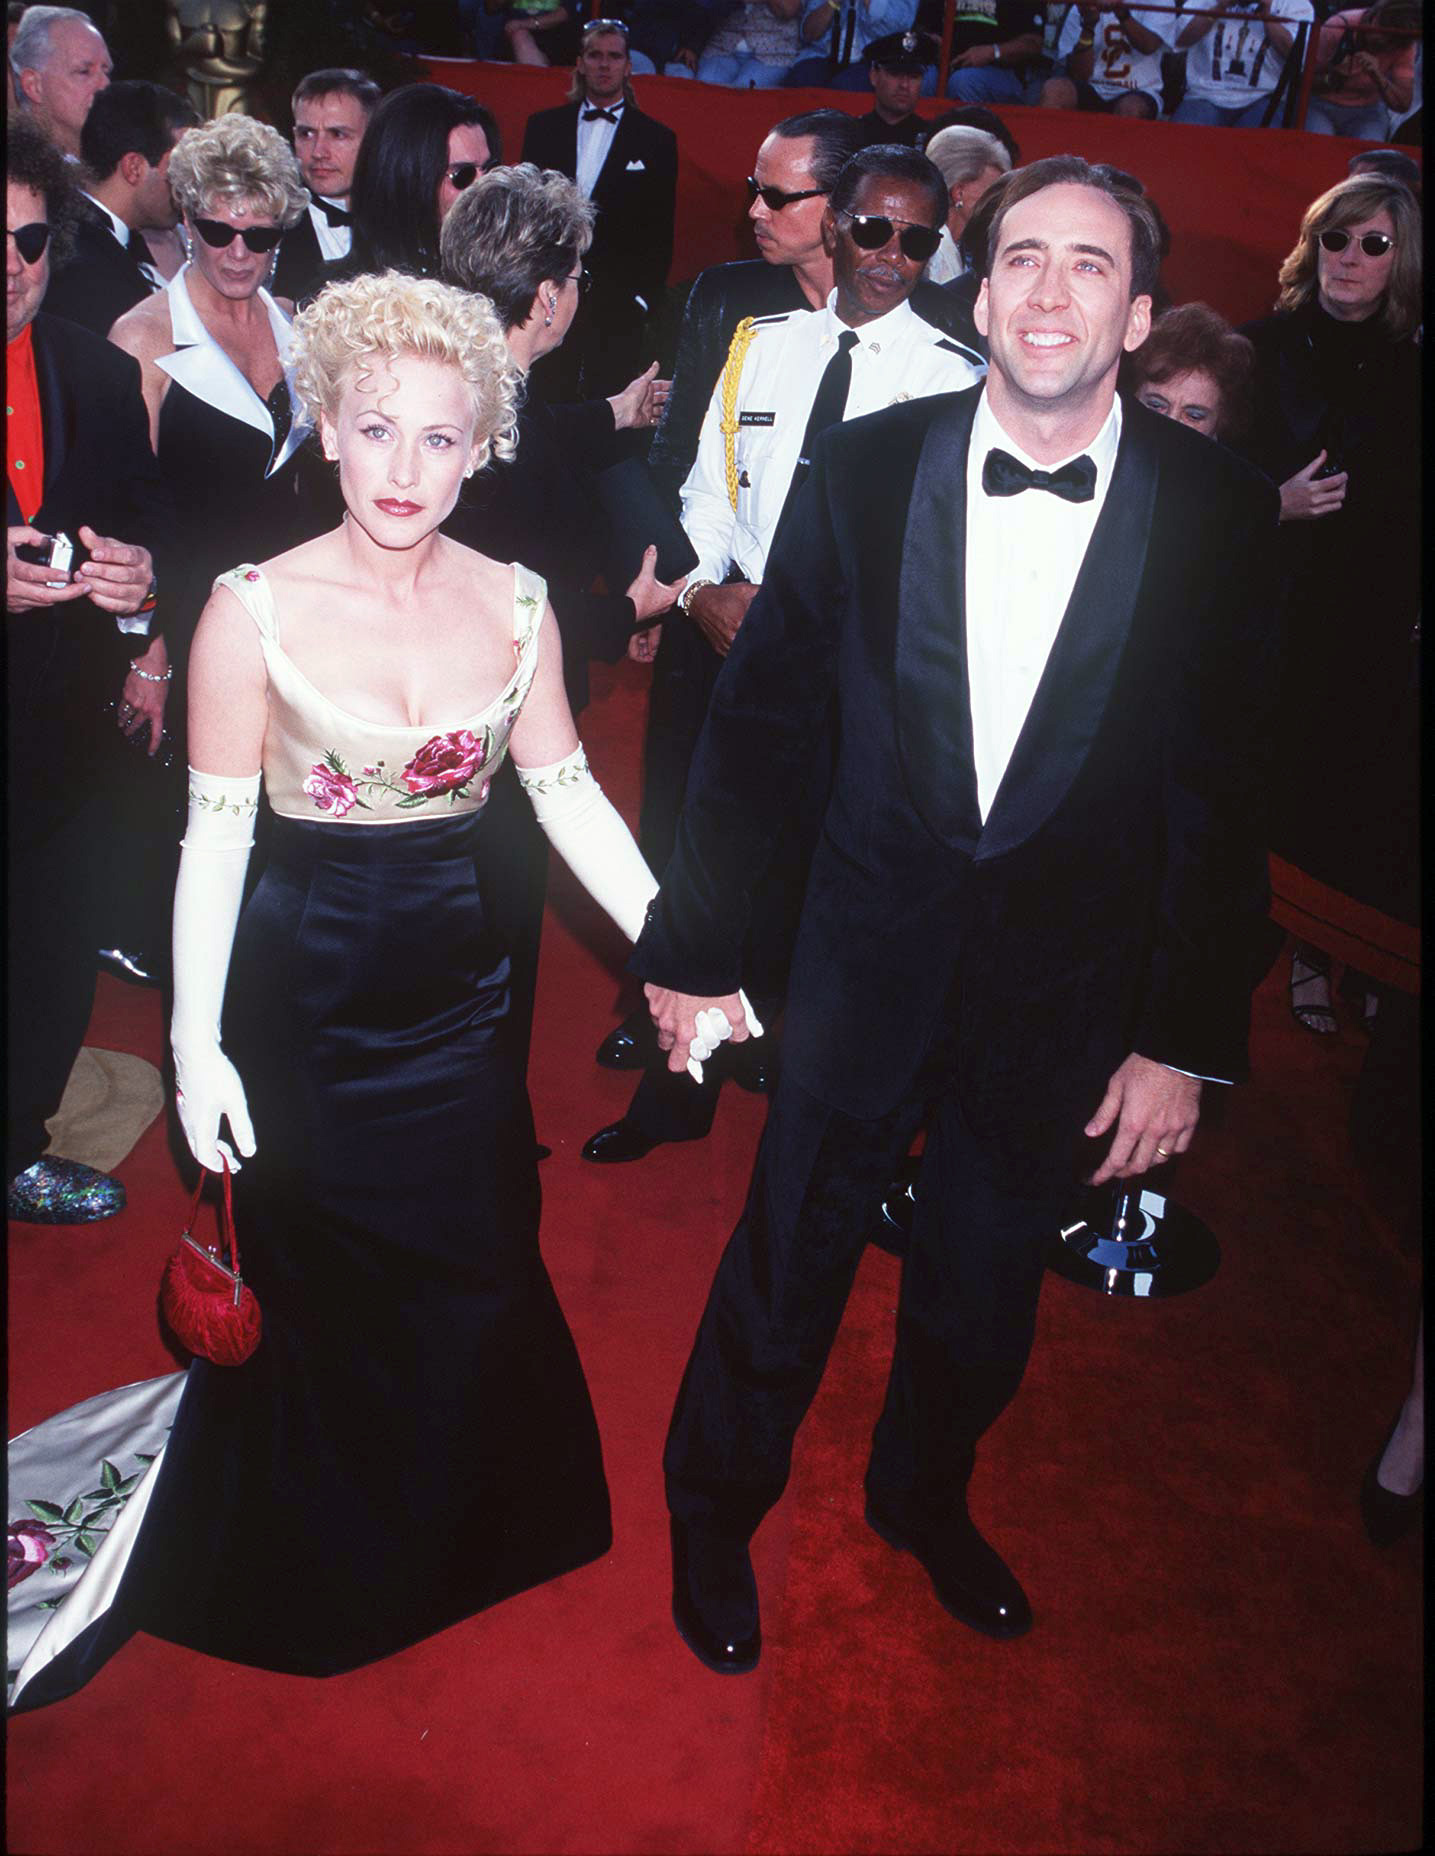 PHOTO: Patricia Arquette and Nicolas Cage arrive for the 69th Annual Academy Awards at Shrine Auditorium in Los Angeles, March 24, 1997.